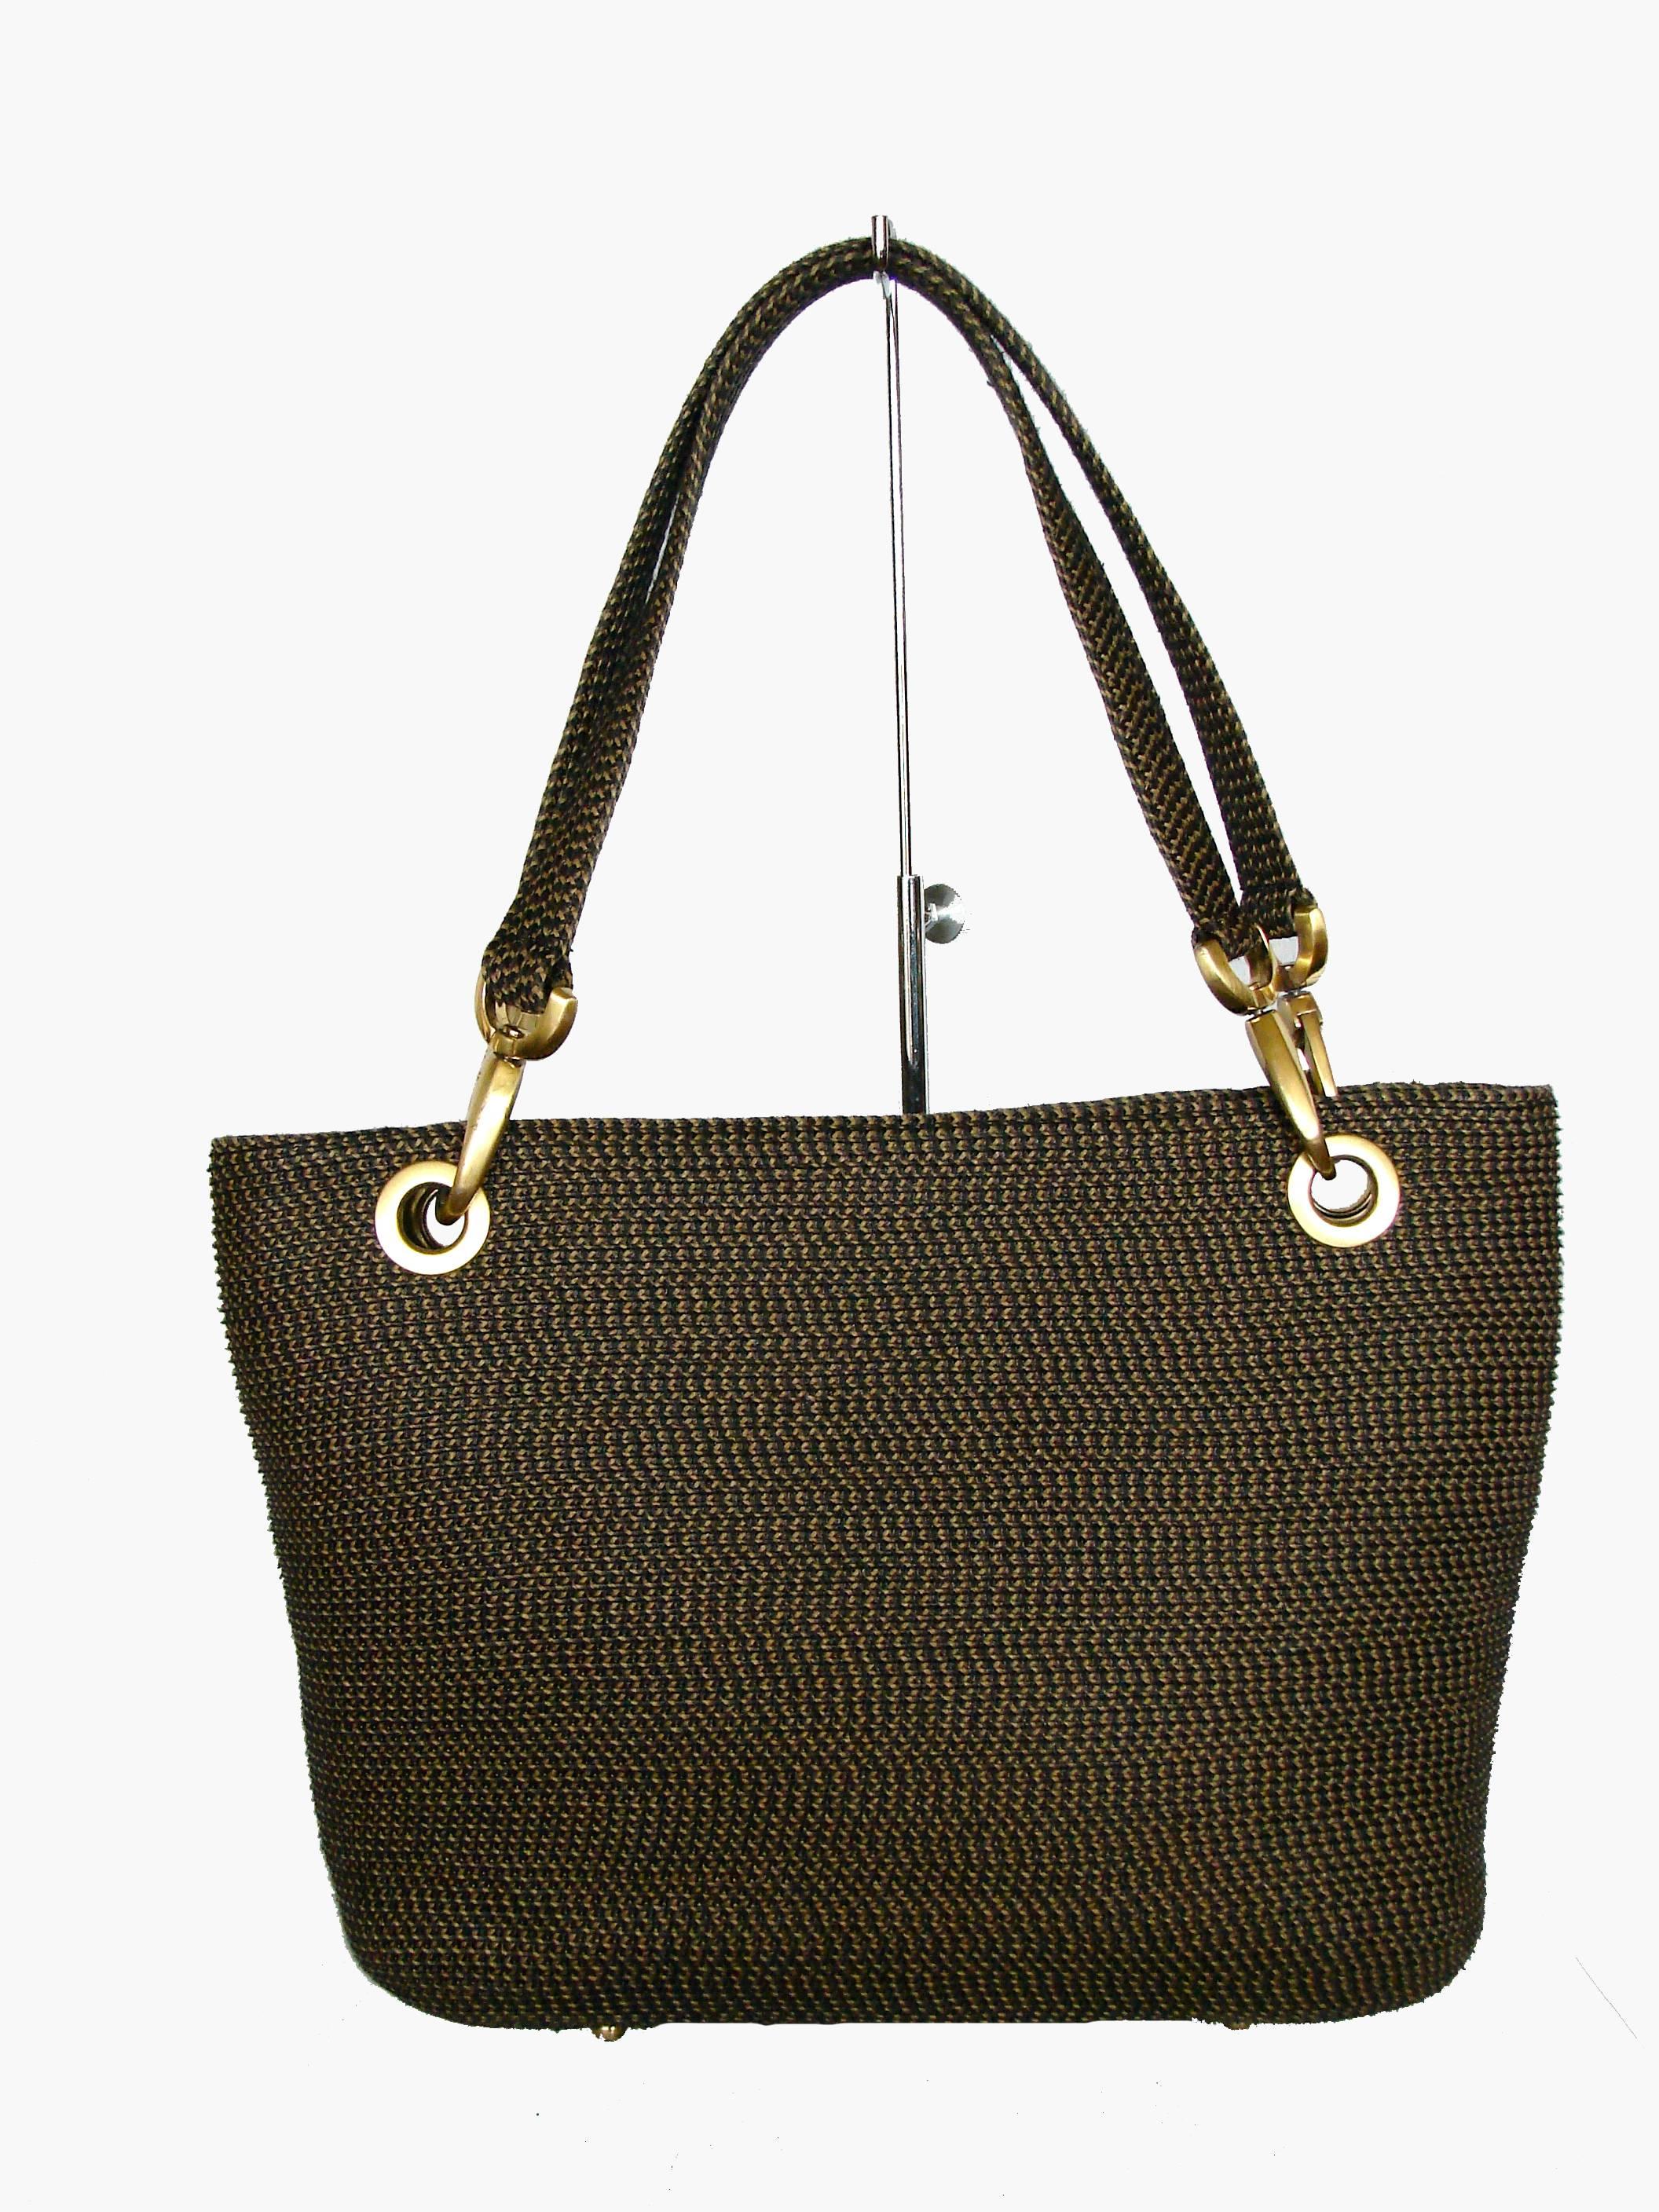 This tote was made by Eric Javits in the early 2000s and features his light weight 